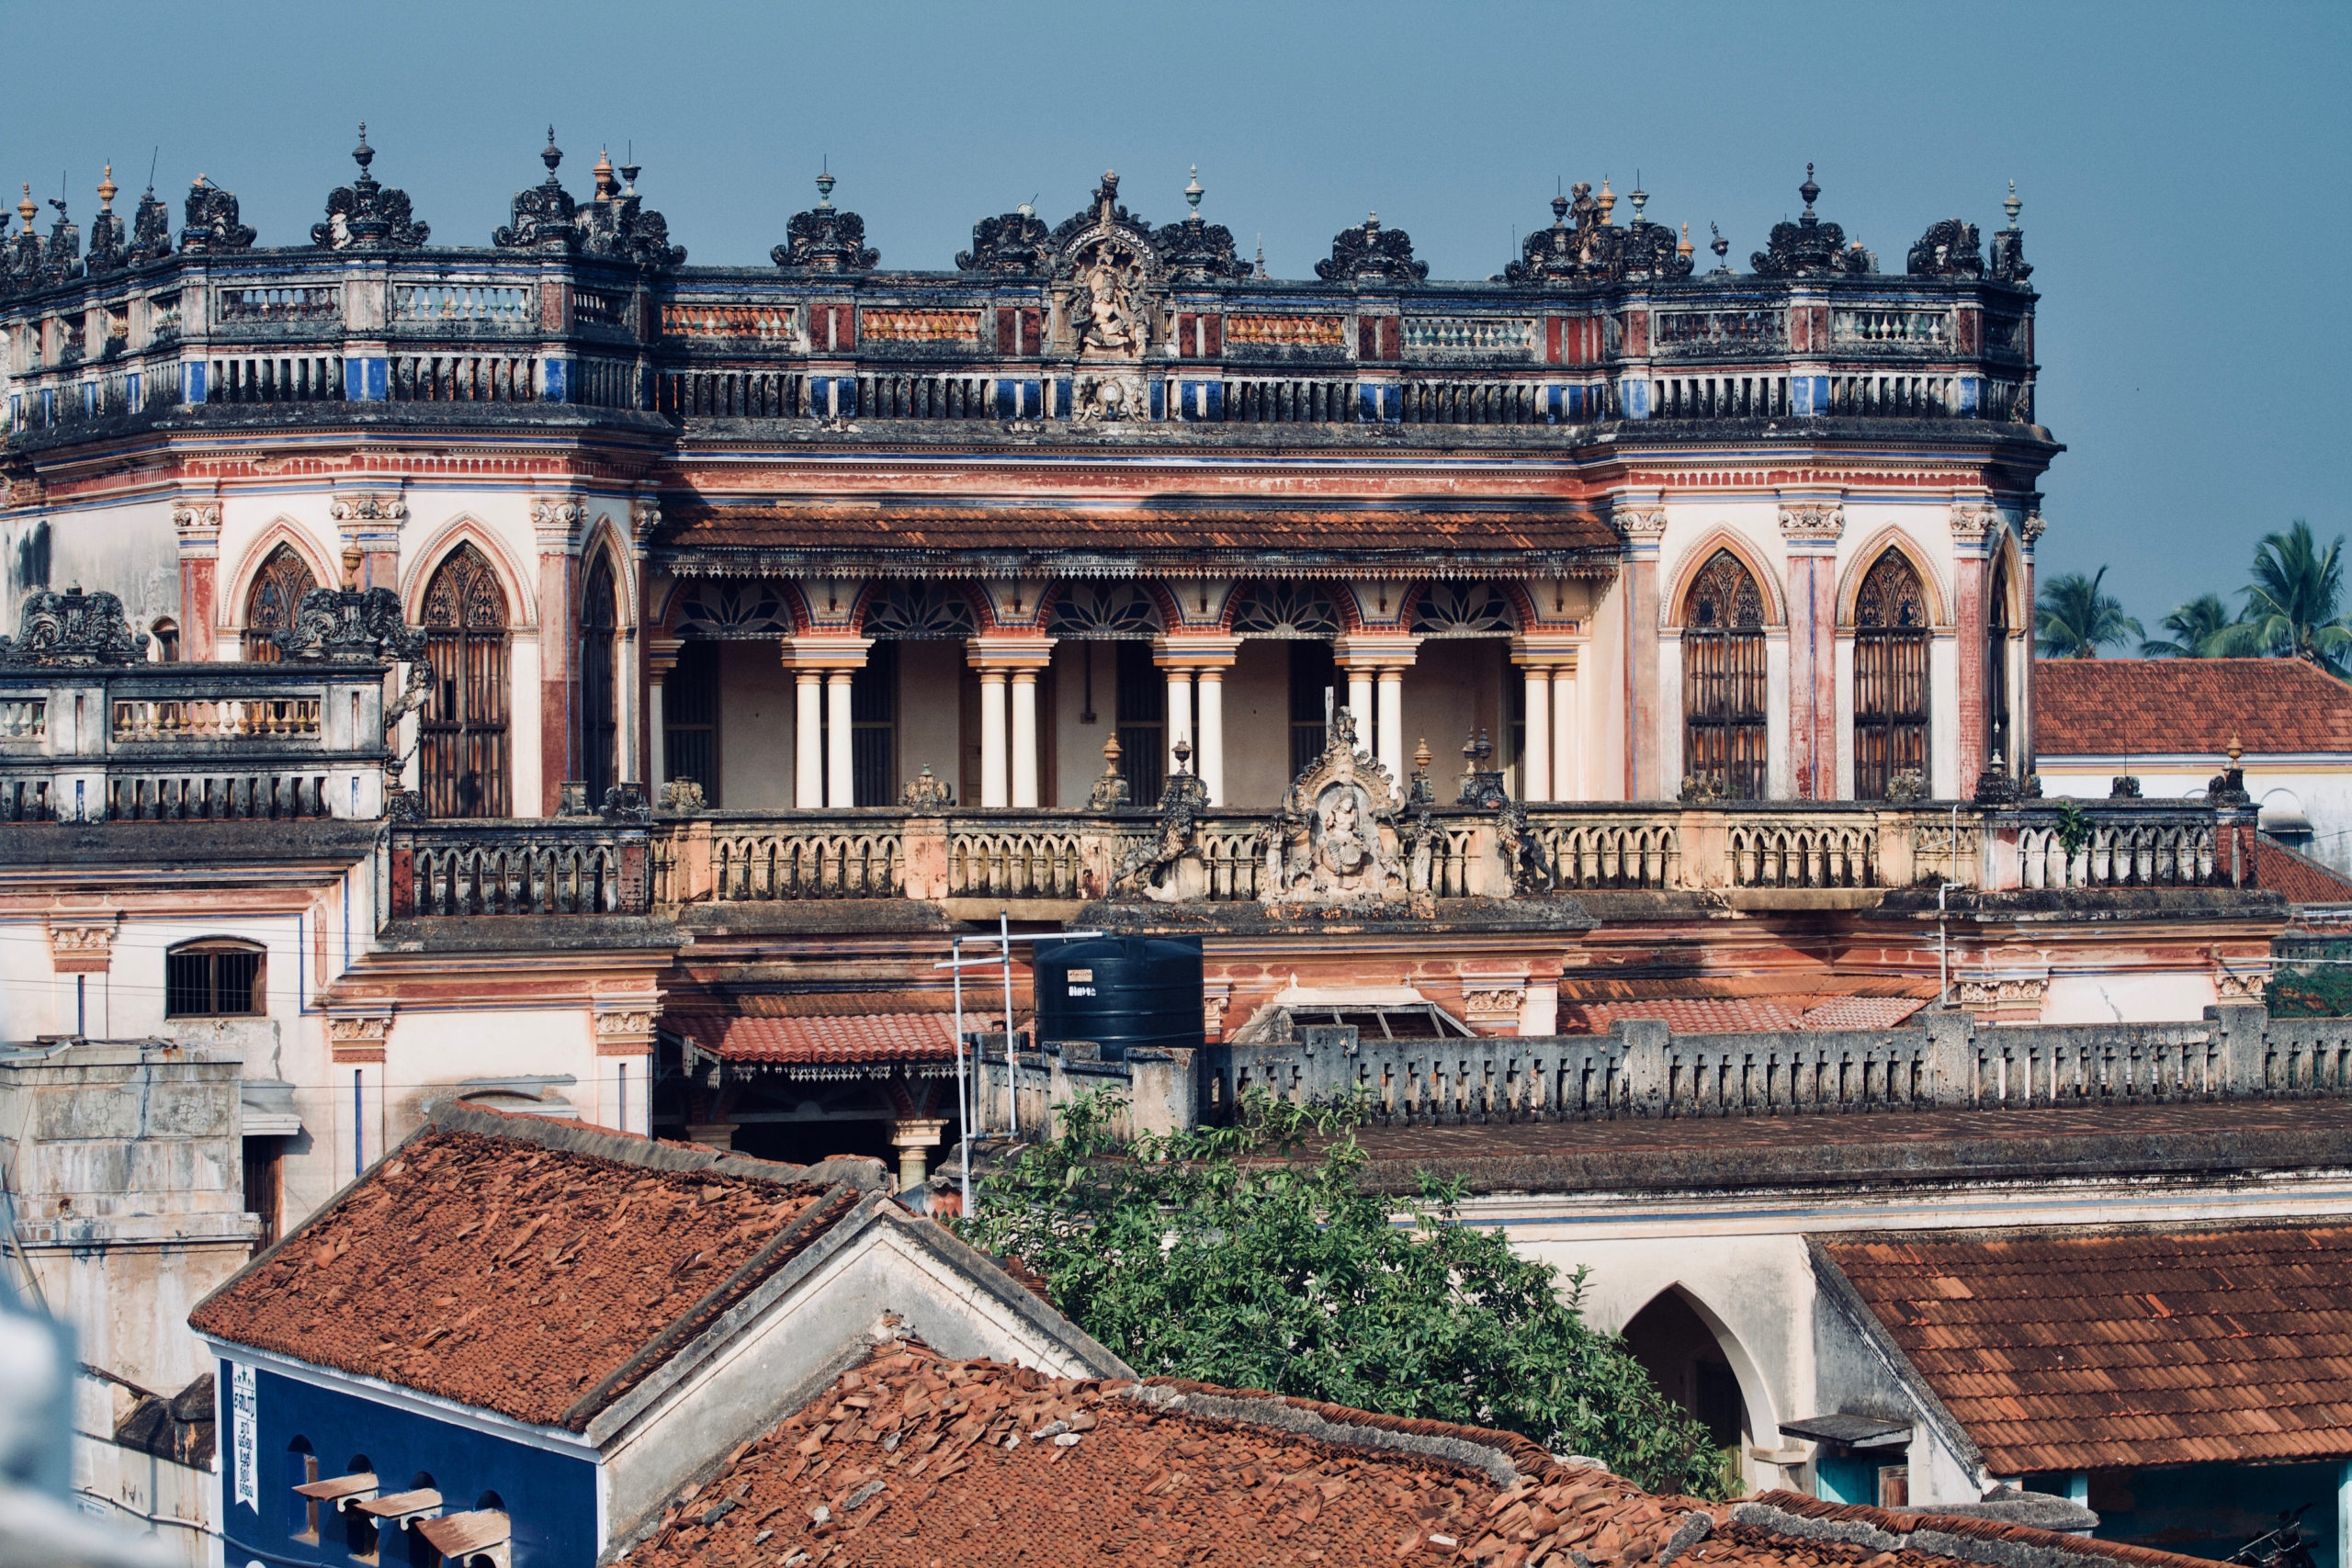 Experience extraordinary Indian sights like this traditional architecture in Chettinad when you take a tailor-made holiday with Alfred&.